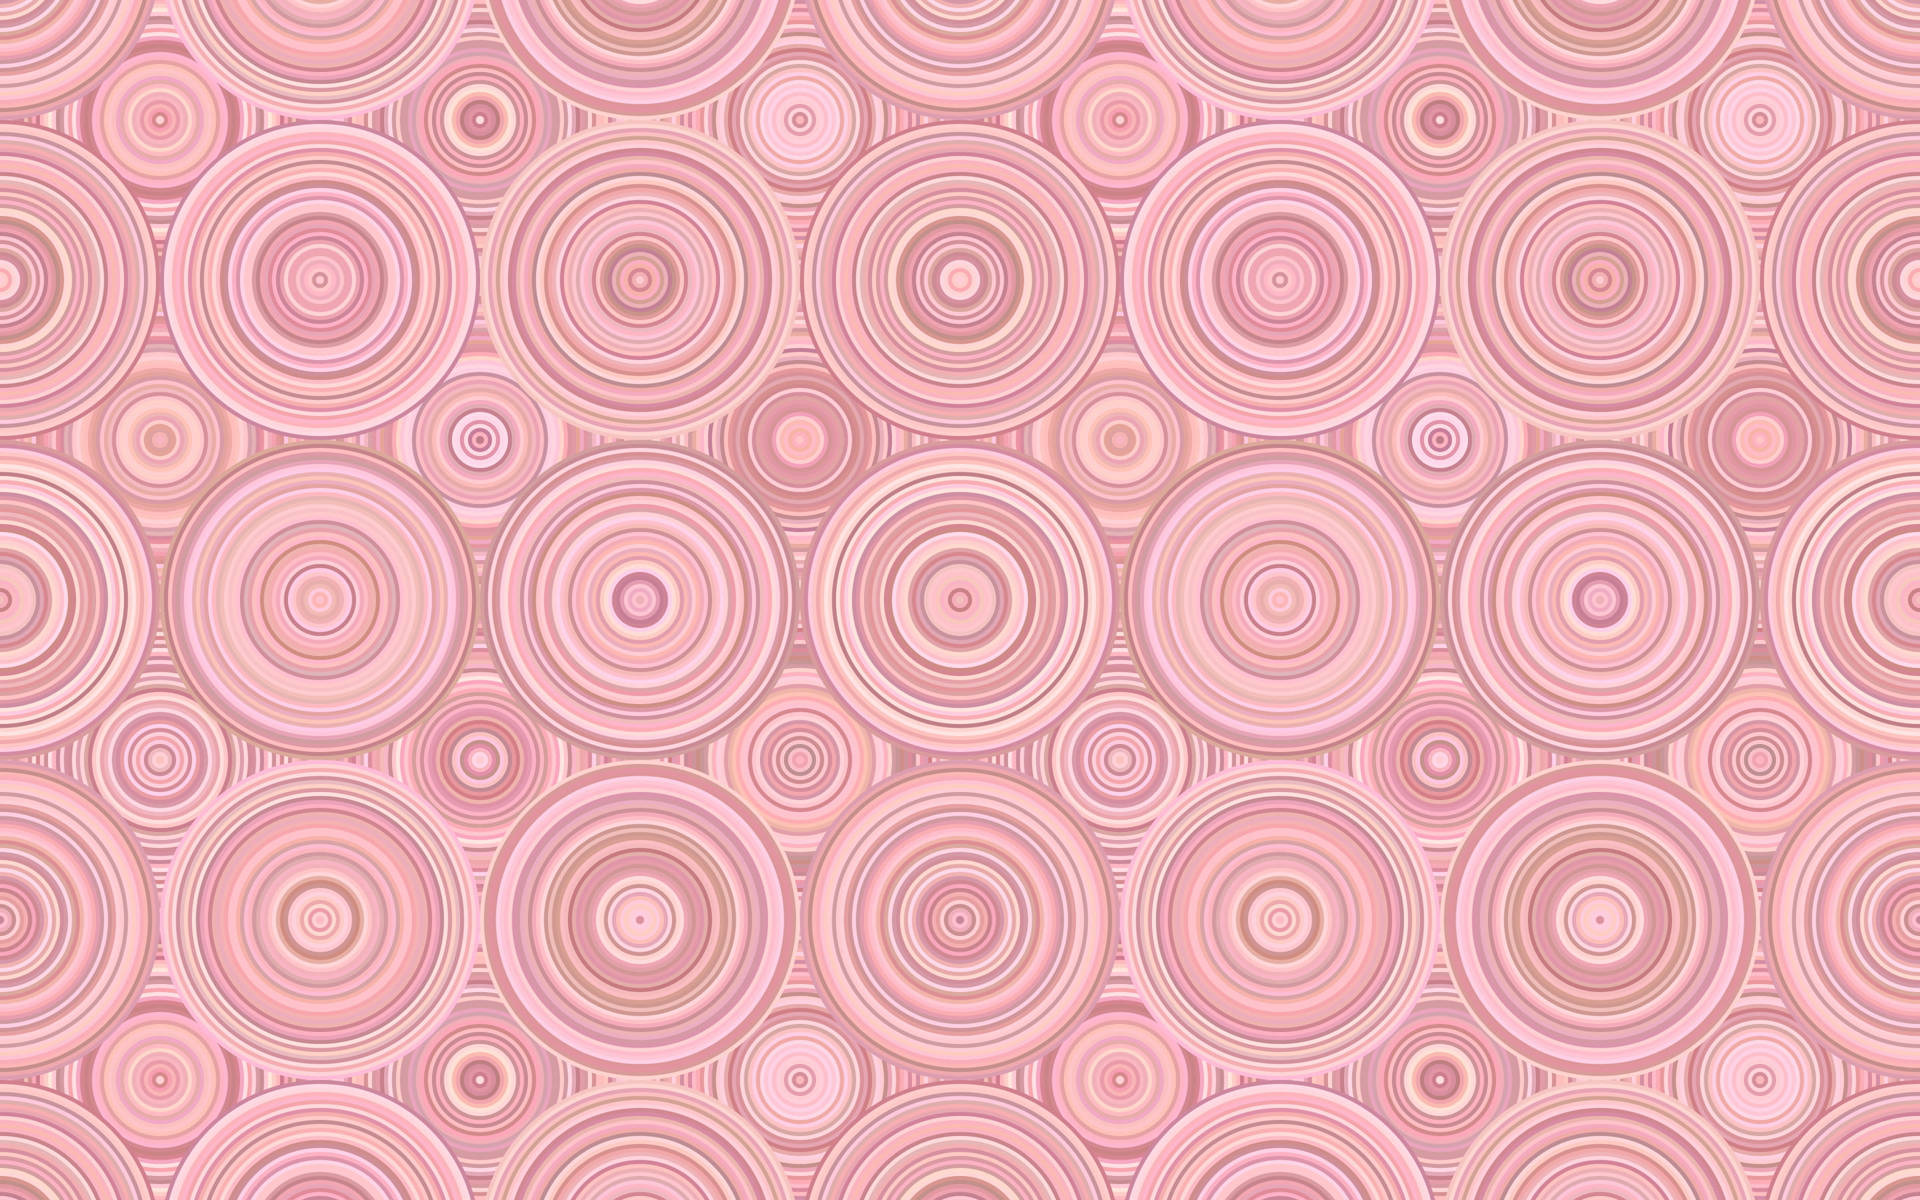 Circles On Pink Background Background